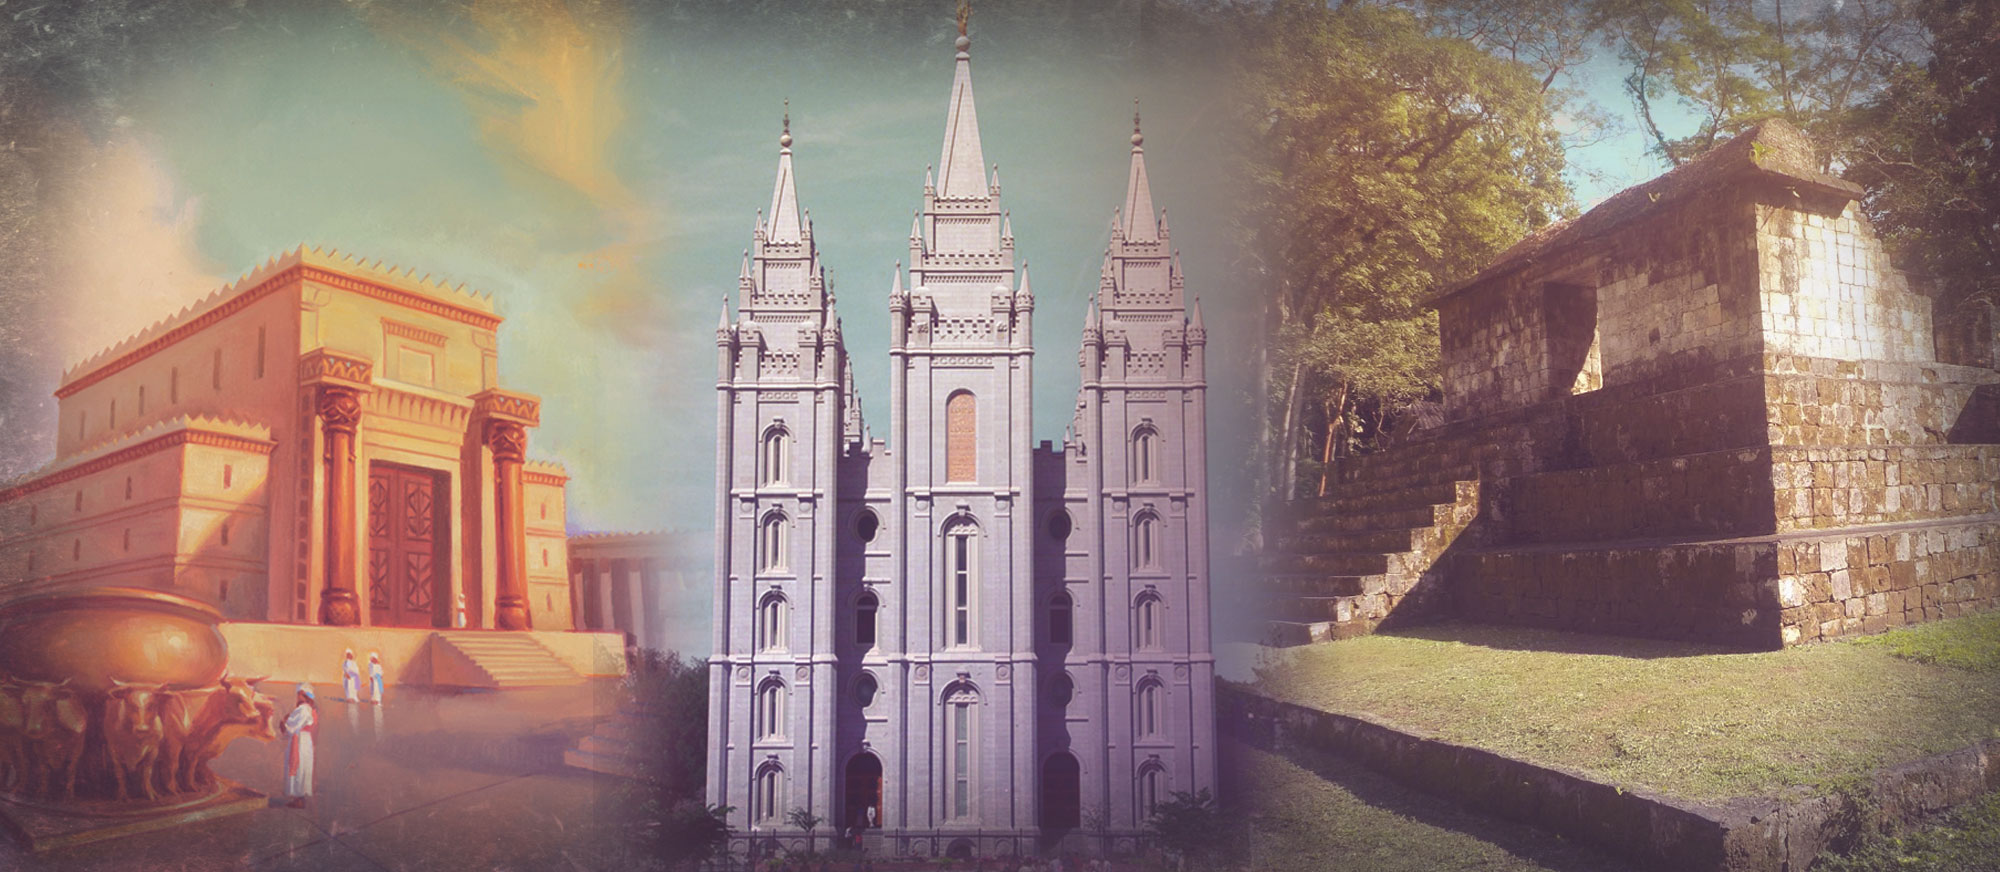 A collage of three buildings. From left to right, the temple of Solomon in Jerusalem, the Salt Lake Temple in Salt Lake City, and a mesoamerican pyramid structure